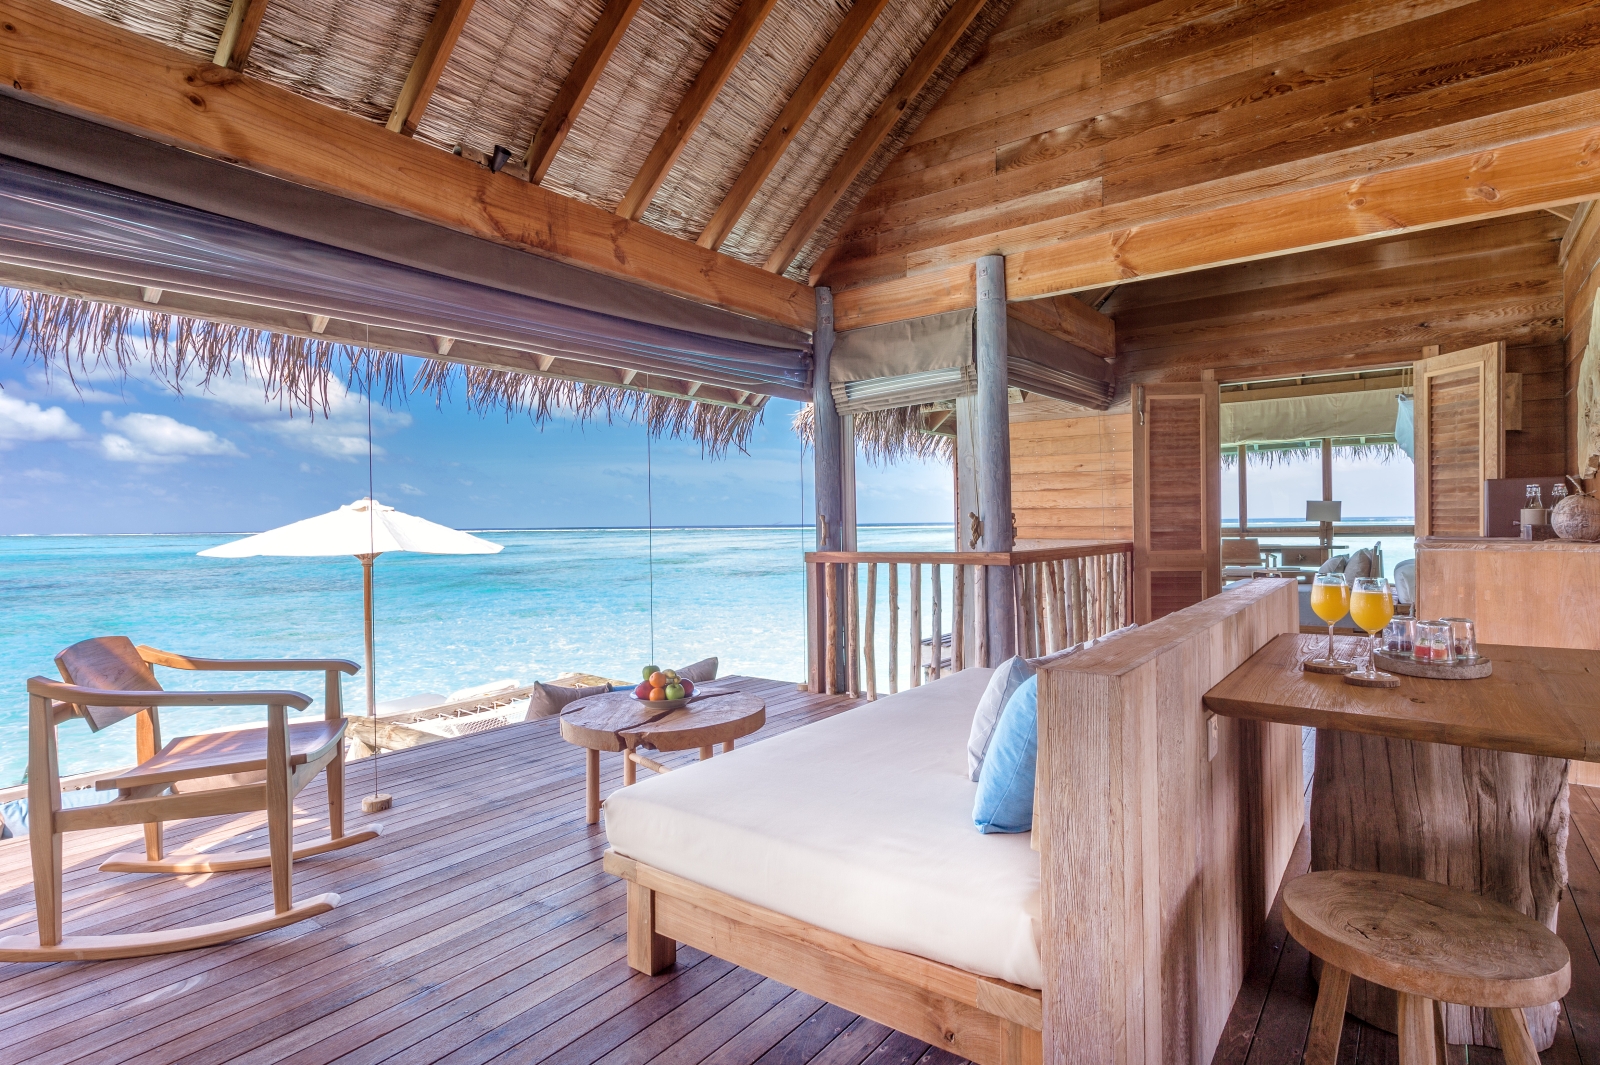 Living Room with seating and dining area and views over the Indian Ocean at luxury resort Gili Lankanfushi in the Maldives